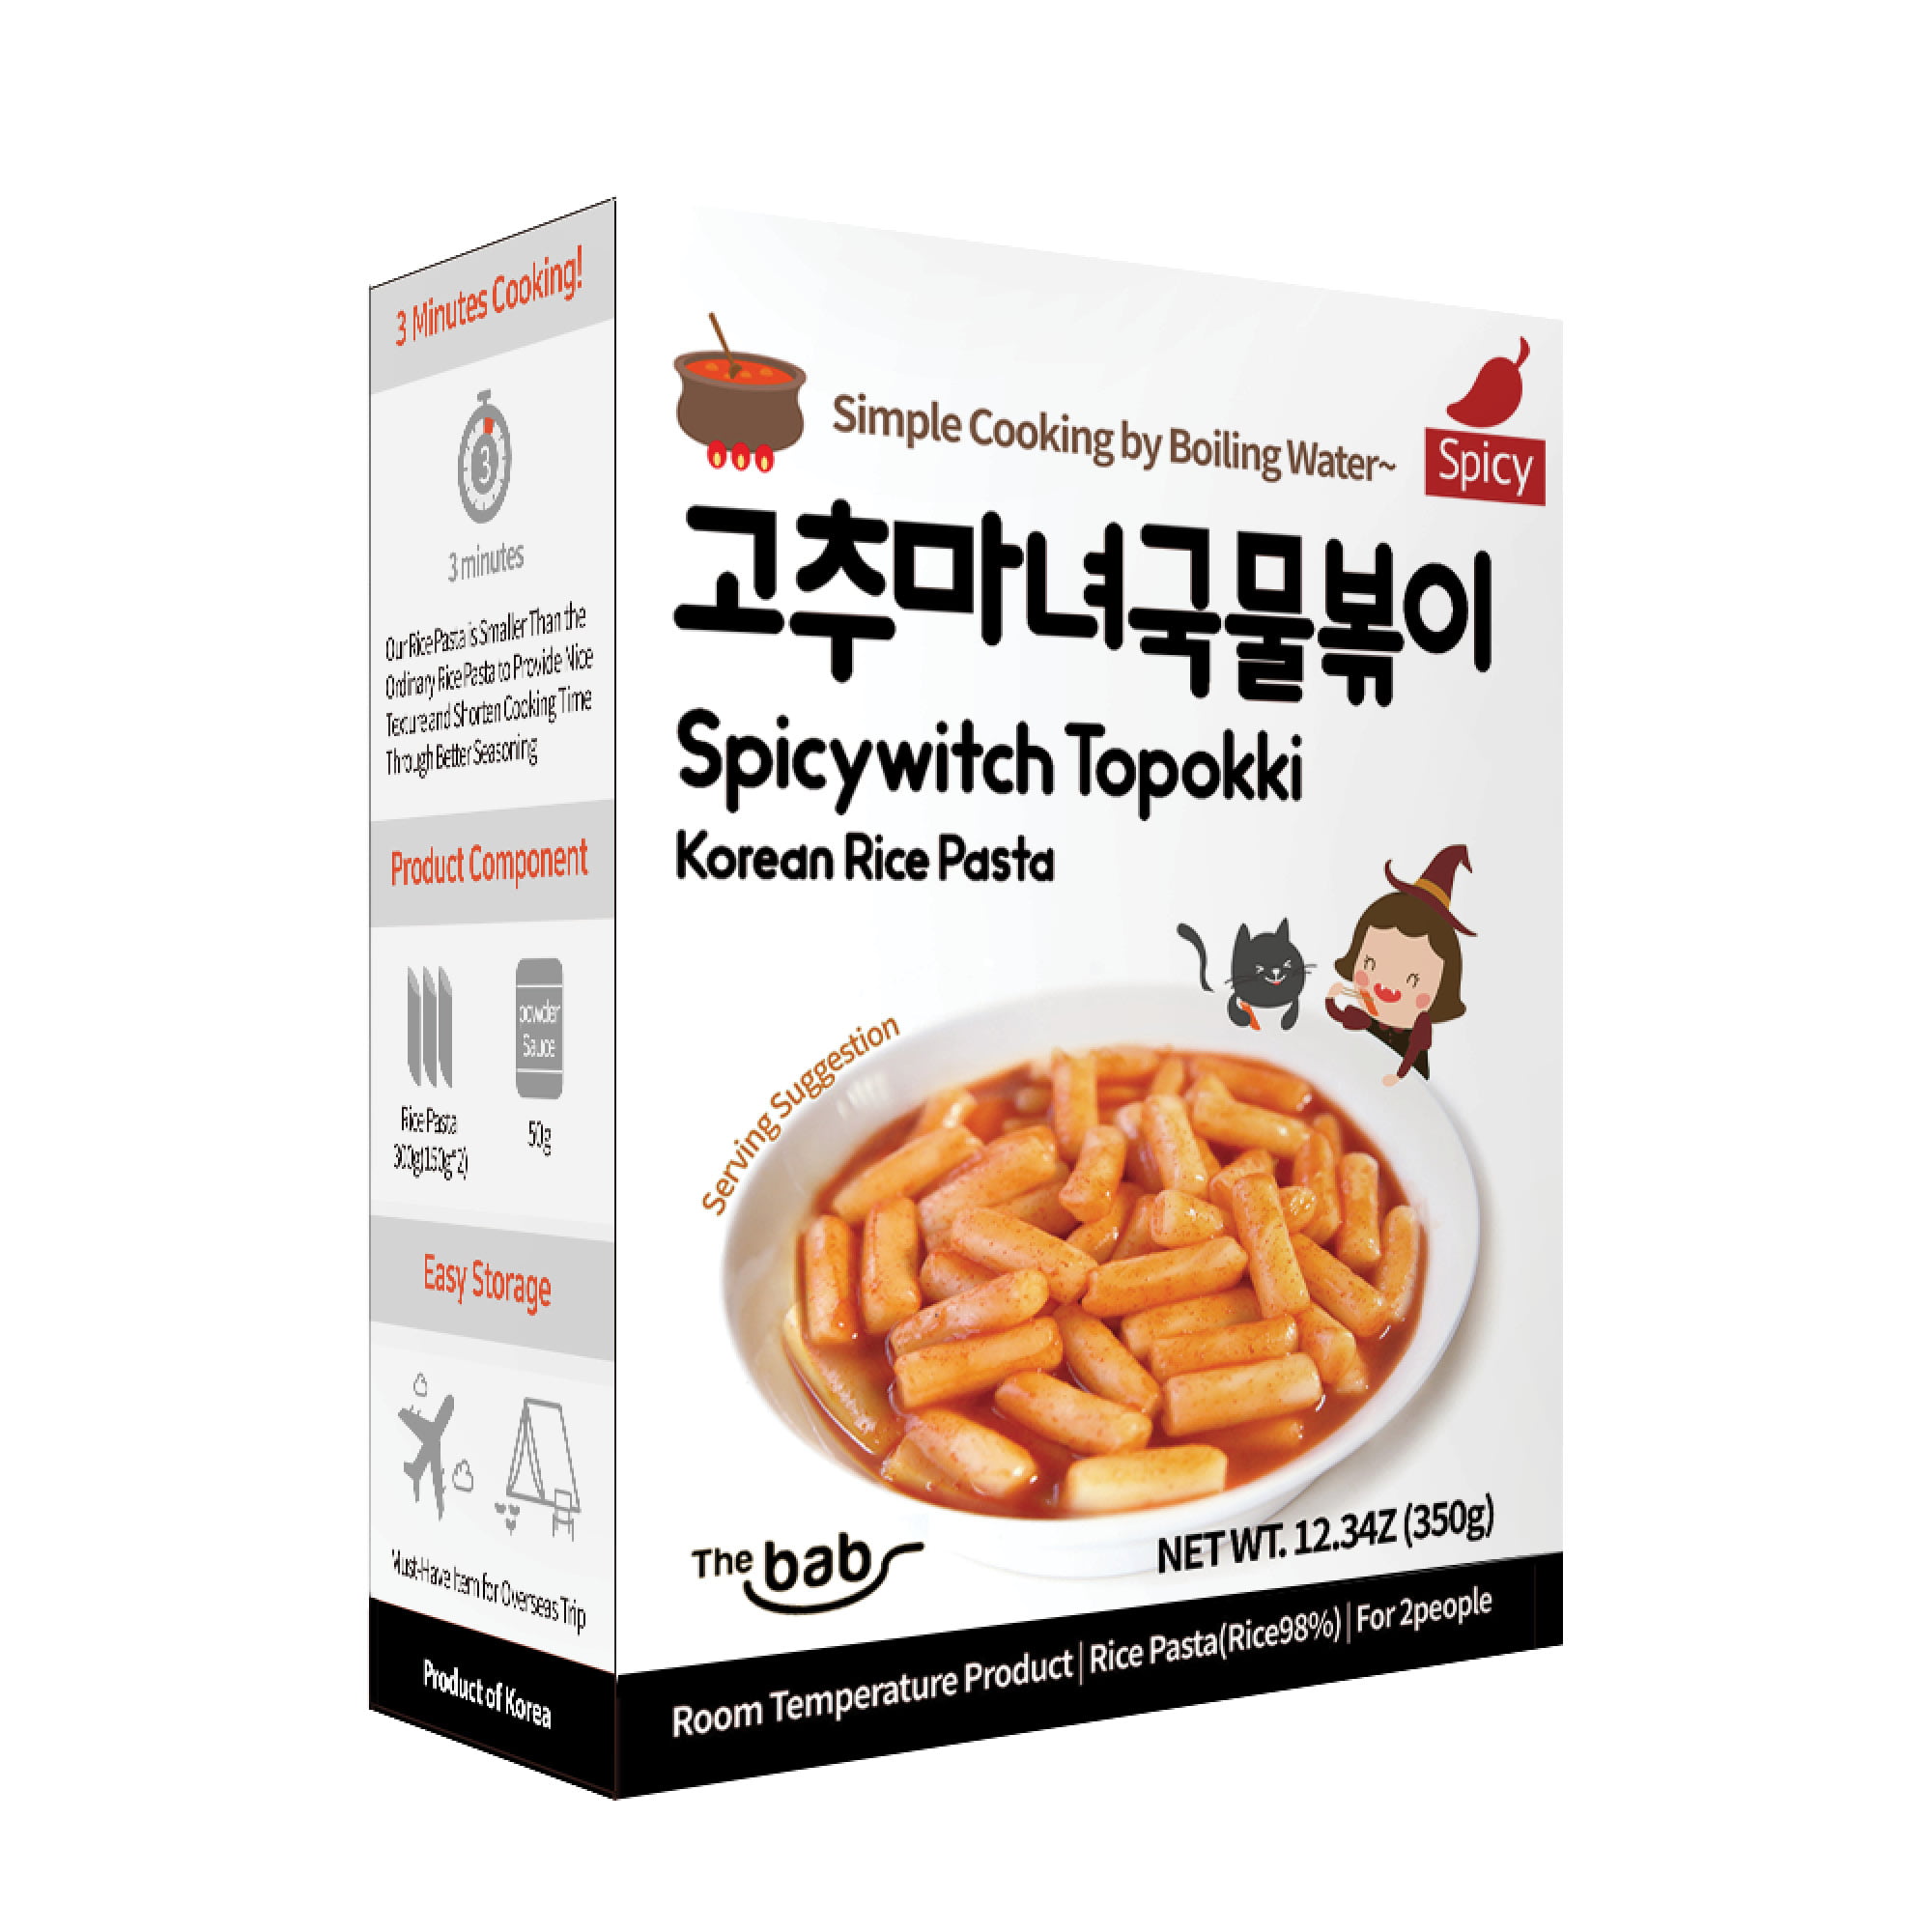 TheBab Spicywitch Topokki Set Korean Tteokbokki Rice Cake Pasta - 3 Minute  Instant Meal Kit (Seasoning Sauce and Rice Pasta Included), Servings For 2  People 350g (Spicy) 